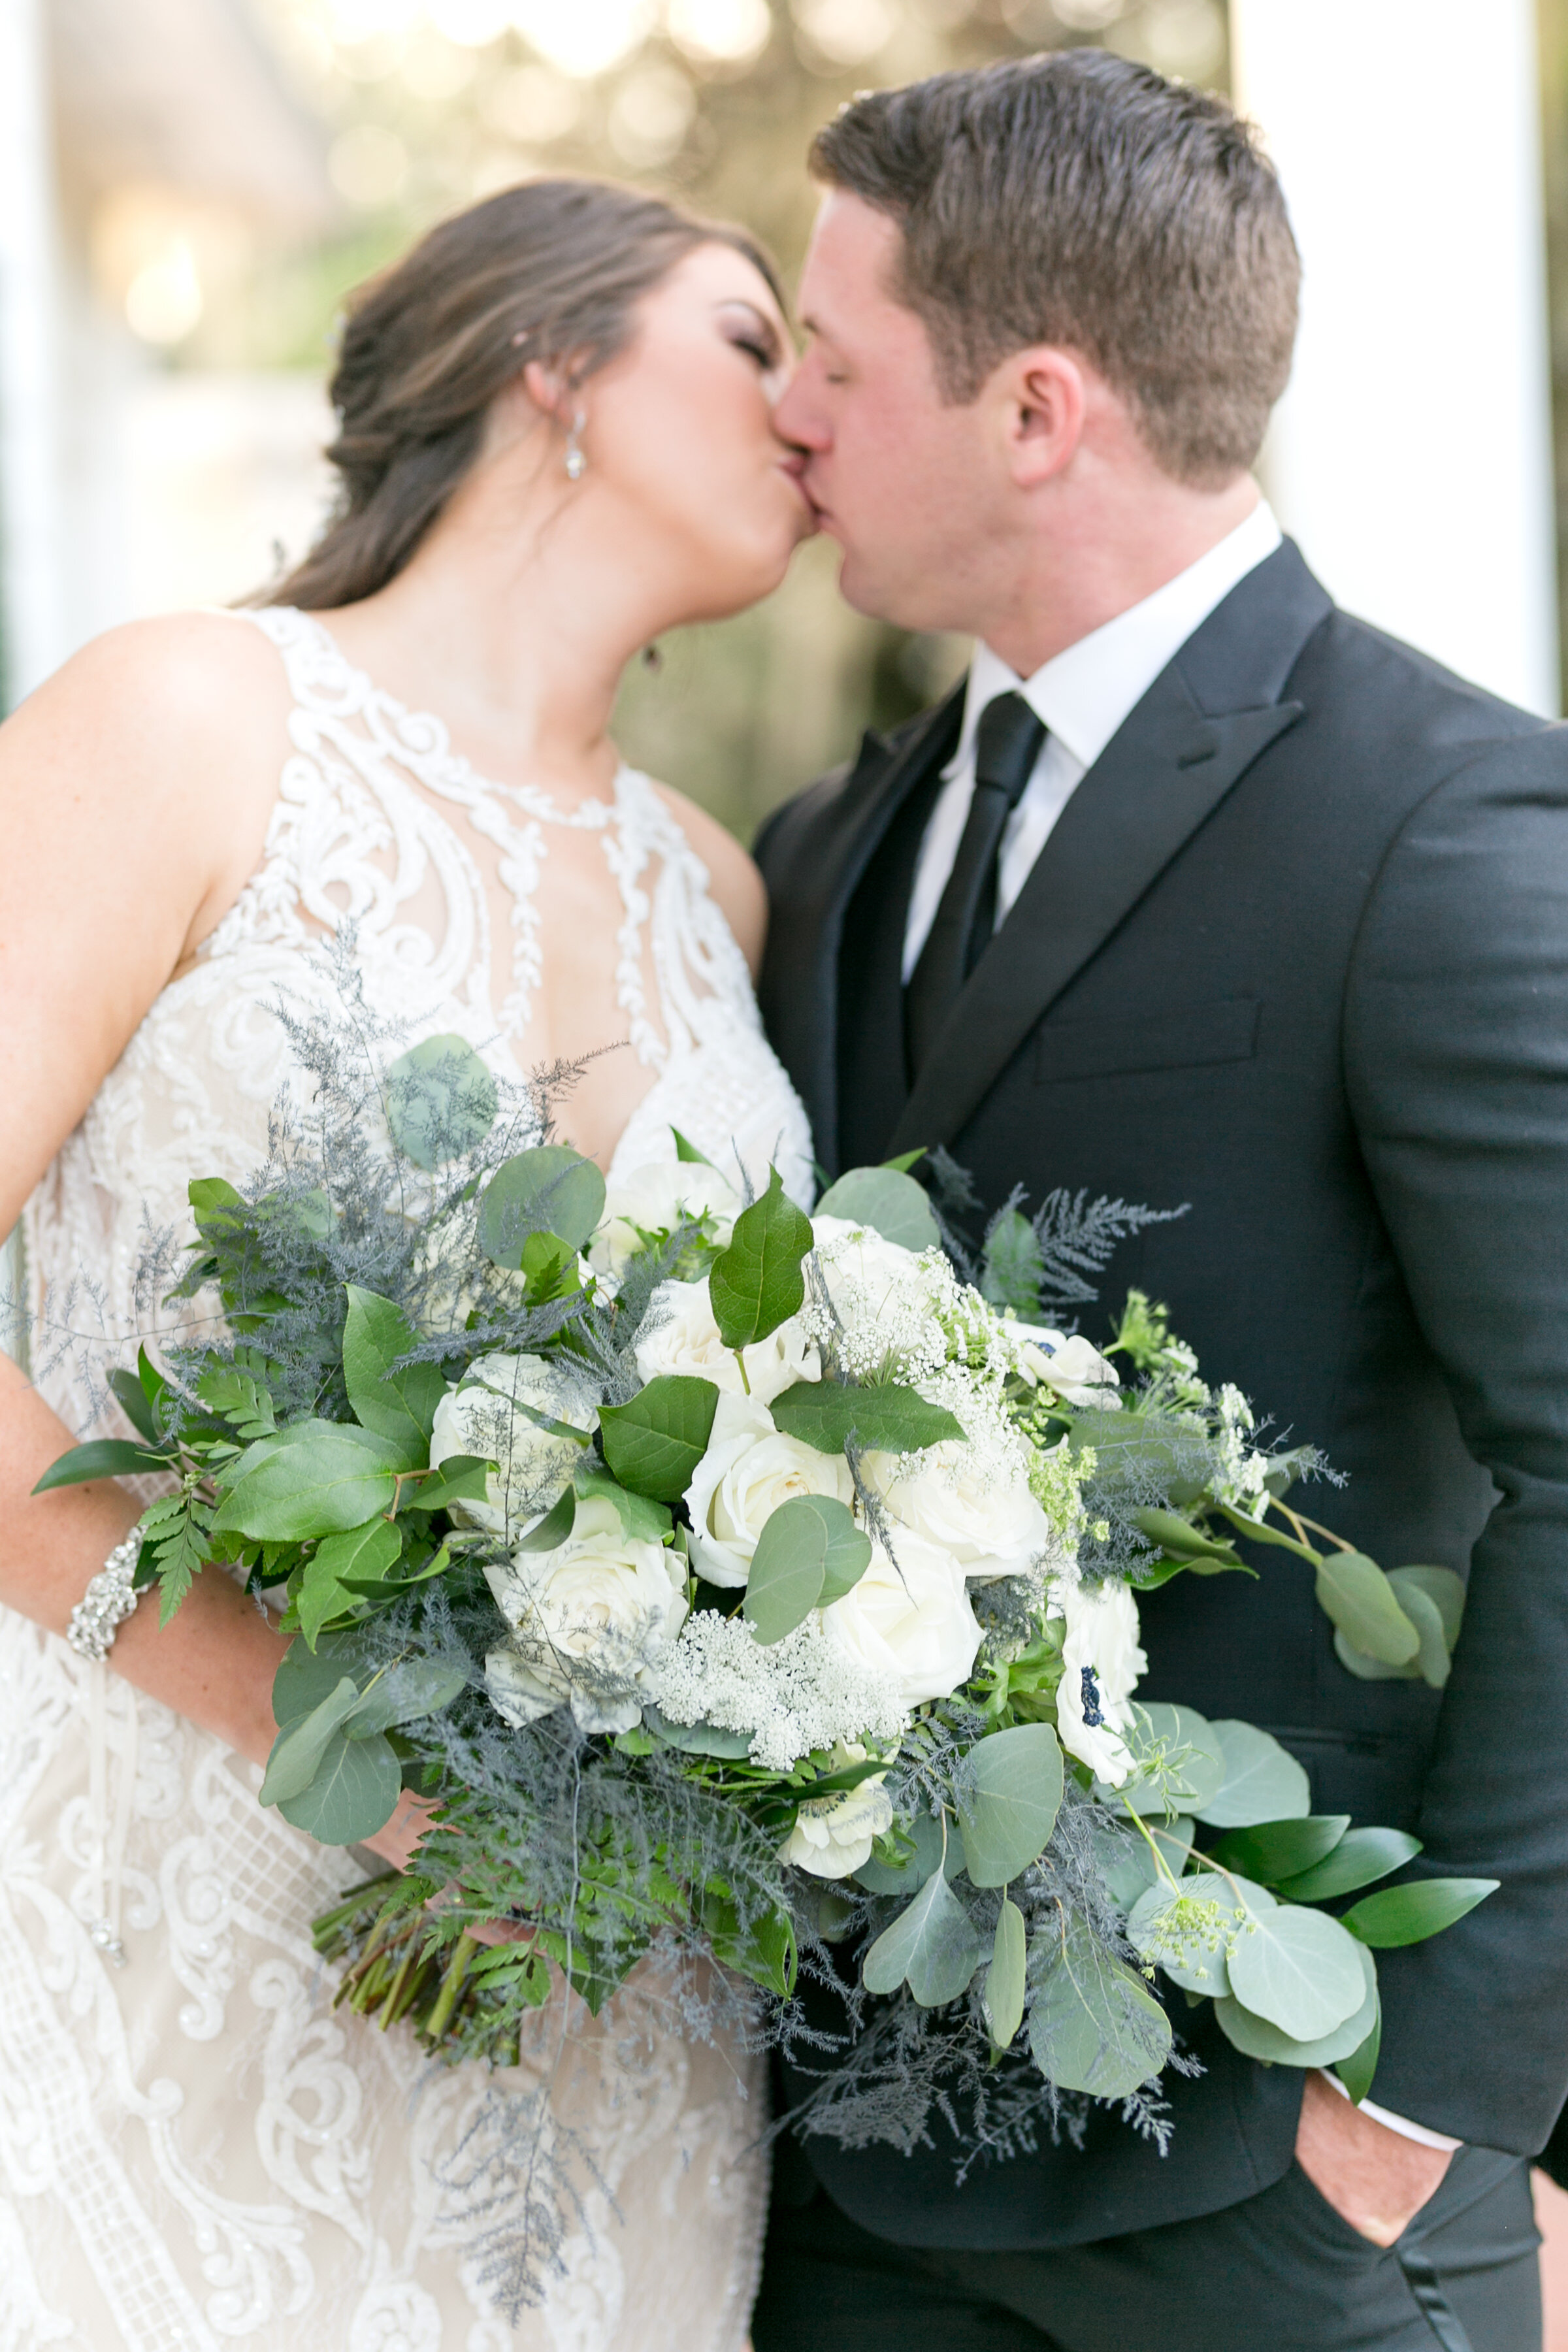 Bluegrass Chic - Black and White Wedding Bouquets with Anemones